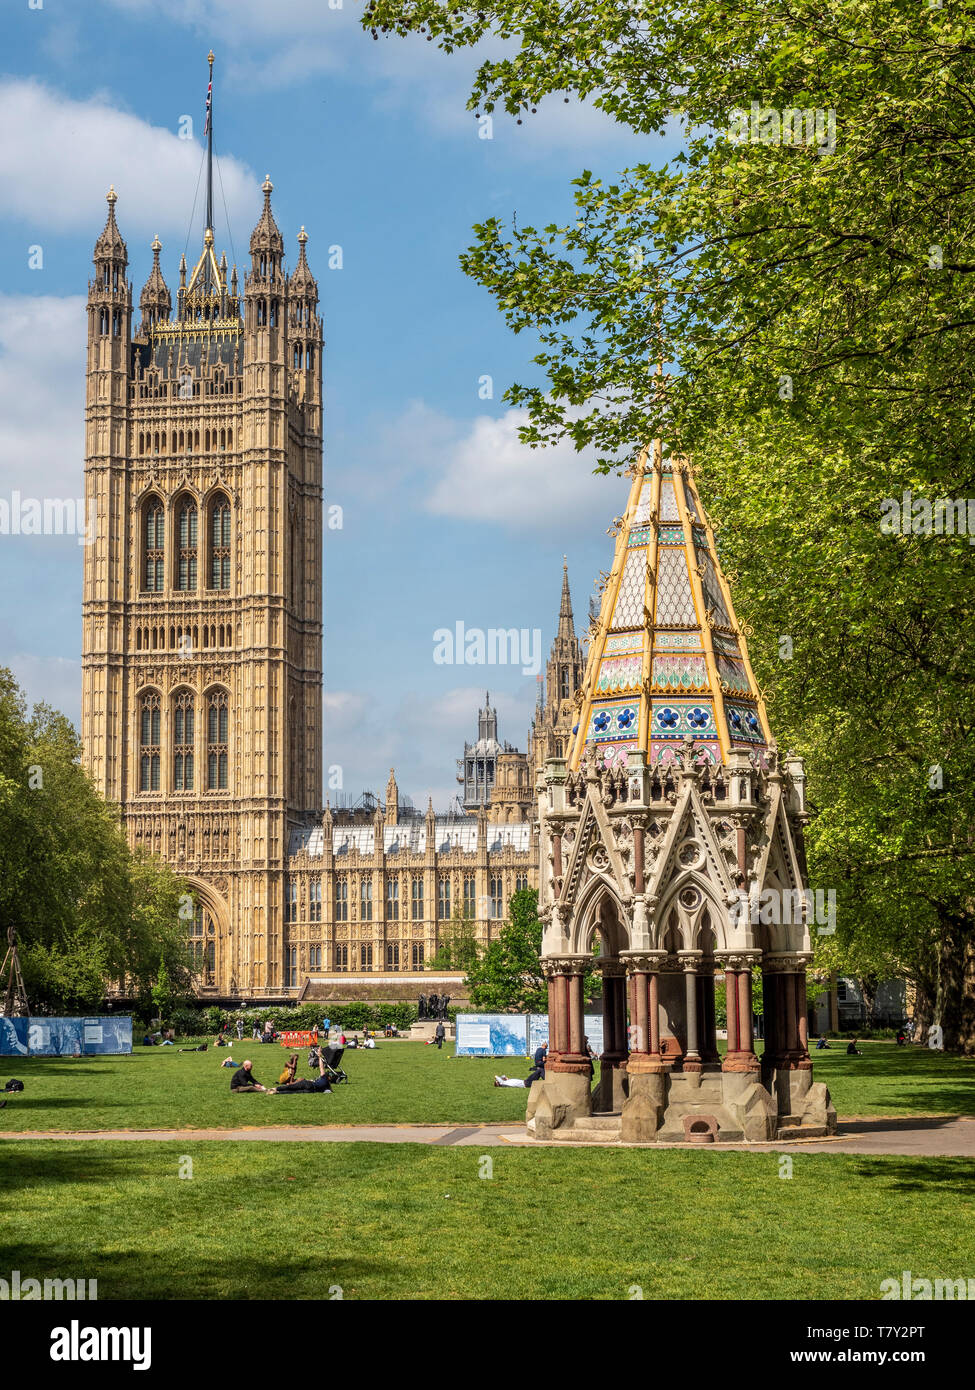 Buxton Memorial Fountain, by Charles Buxton and Samuel Sanders Teulon, celebrating the emancipation of slaves in the British Empire in 1834, Victoria  Stock Photo